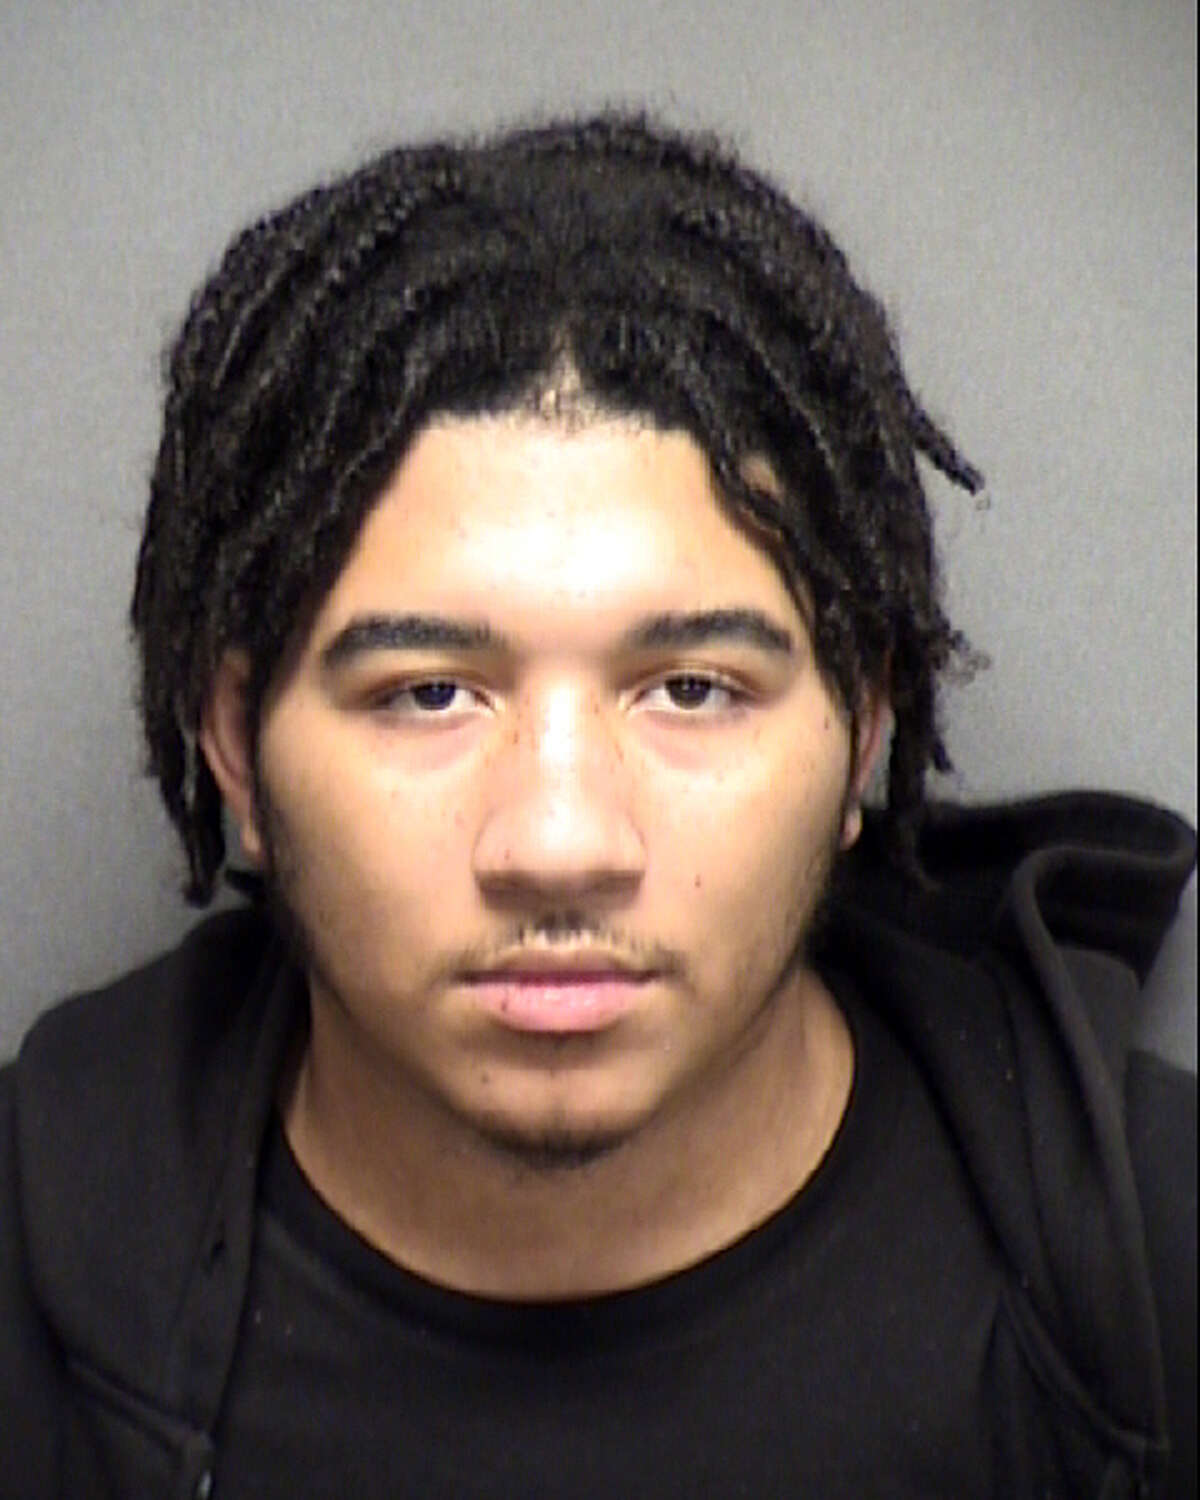 Anthony Nash, 22, was charged with murder in connection with the fatal shooting of Anthony Sanks in 2020.